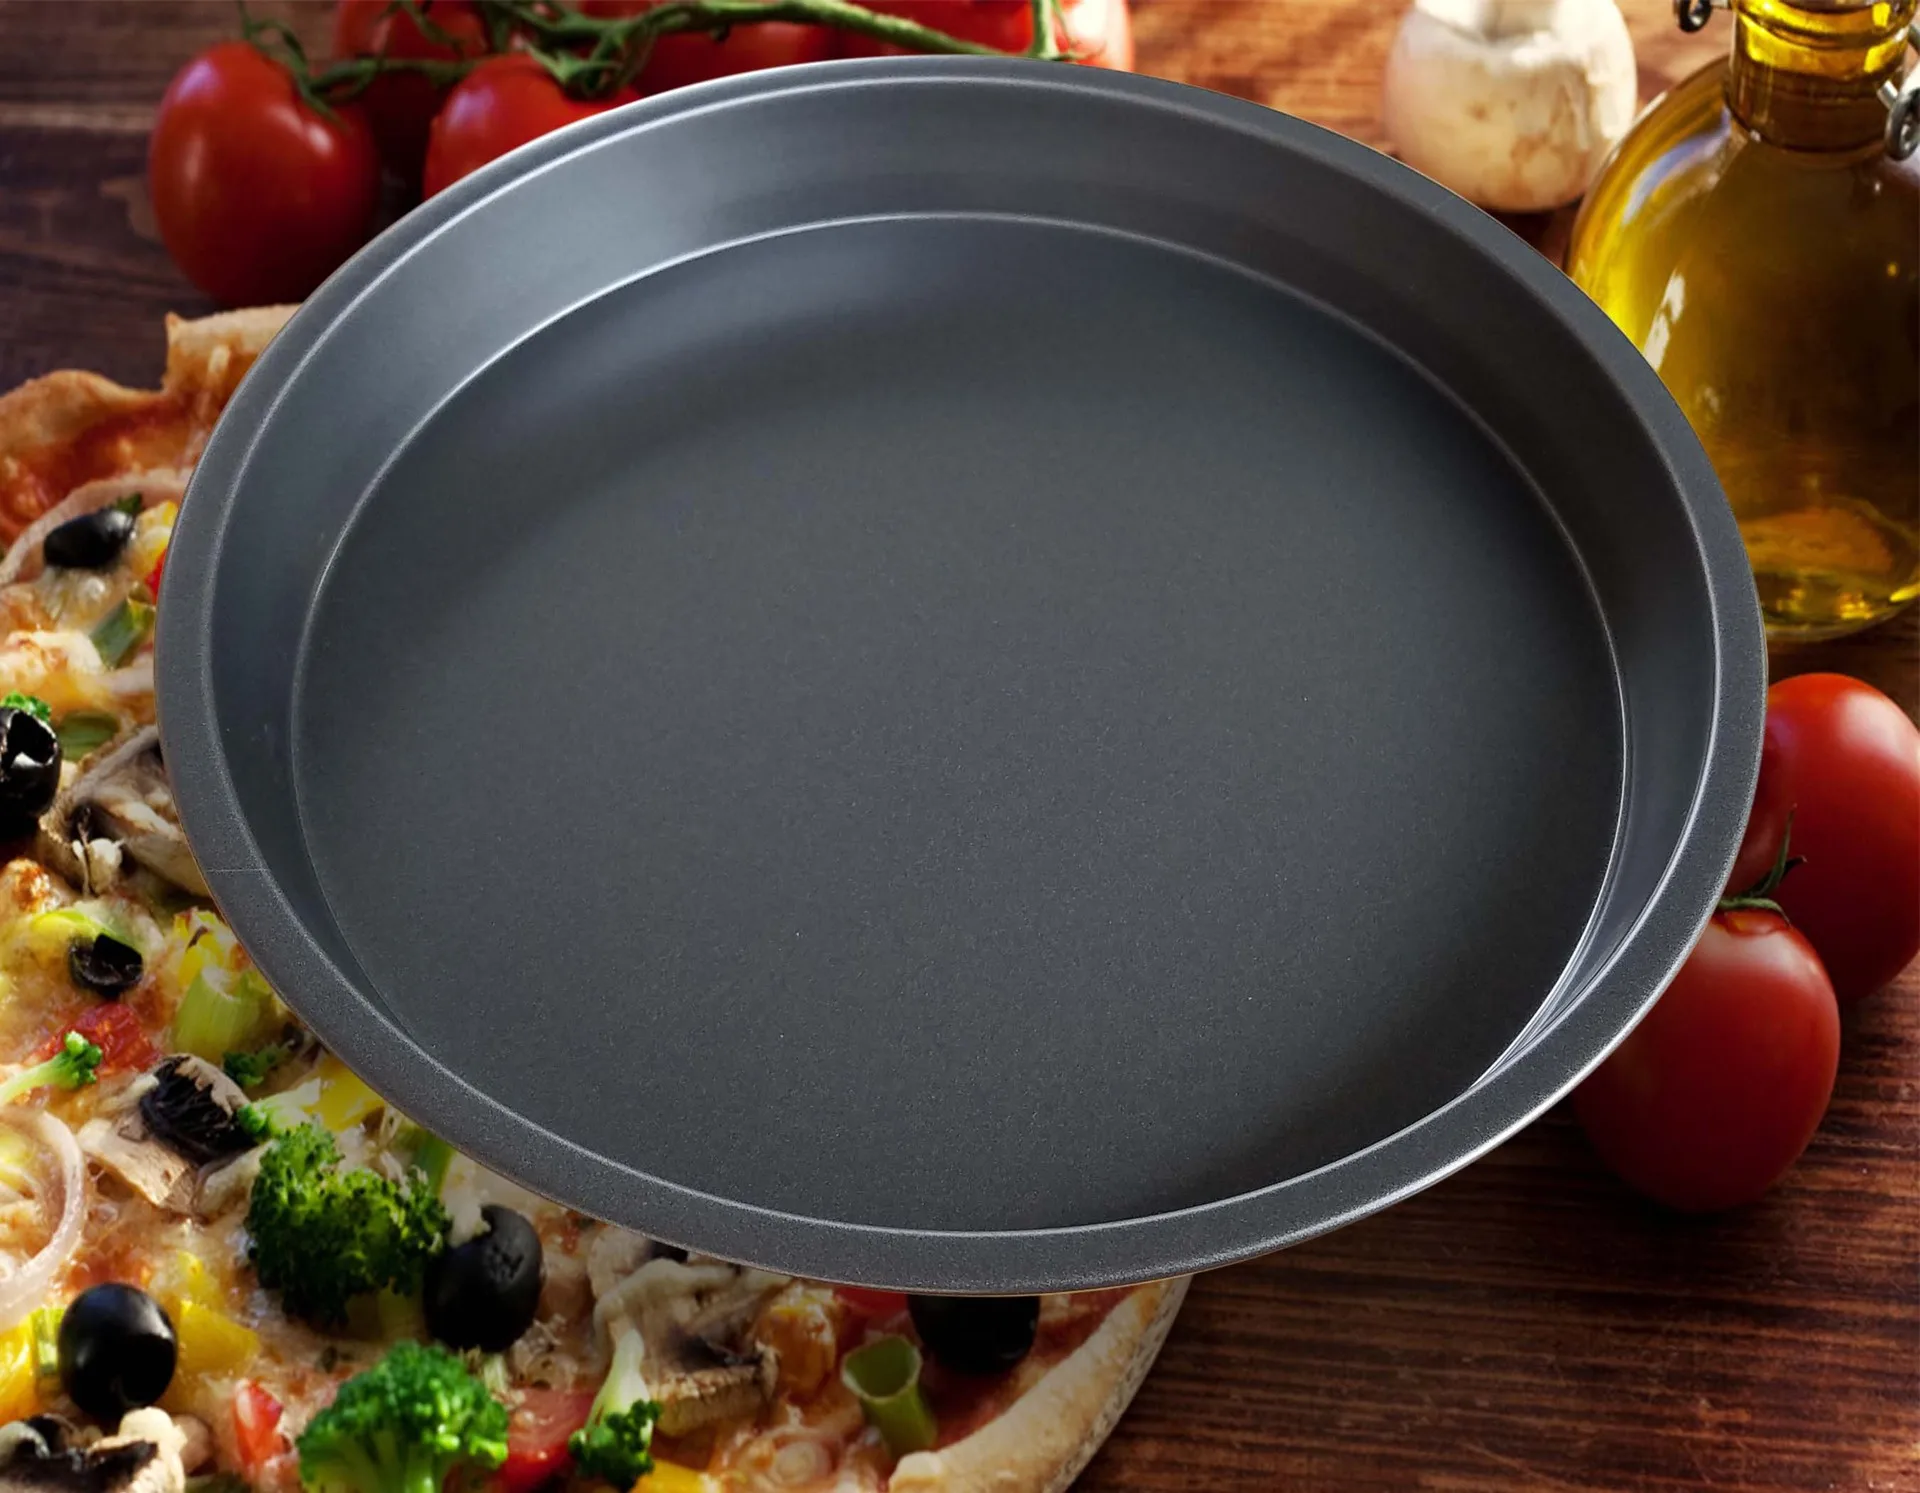 Fdit 8in Kitchen Pizza Tray Non-stick Black Carbon Steel Round Baking Plate Pizza Tray Baking Pan Plate Mould Tool 